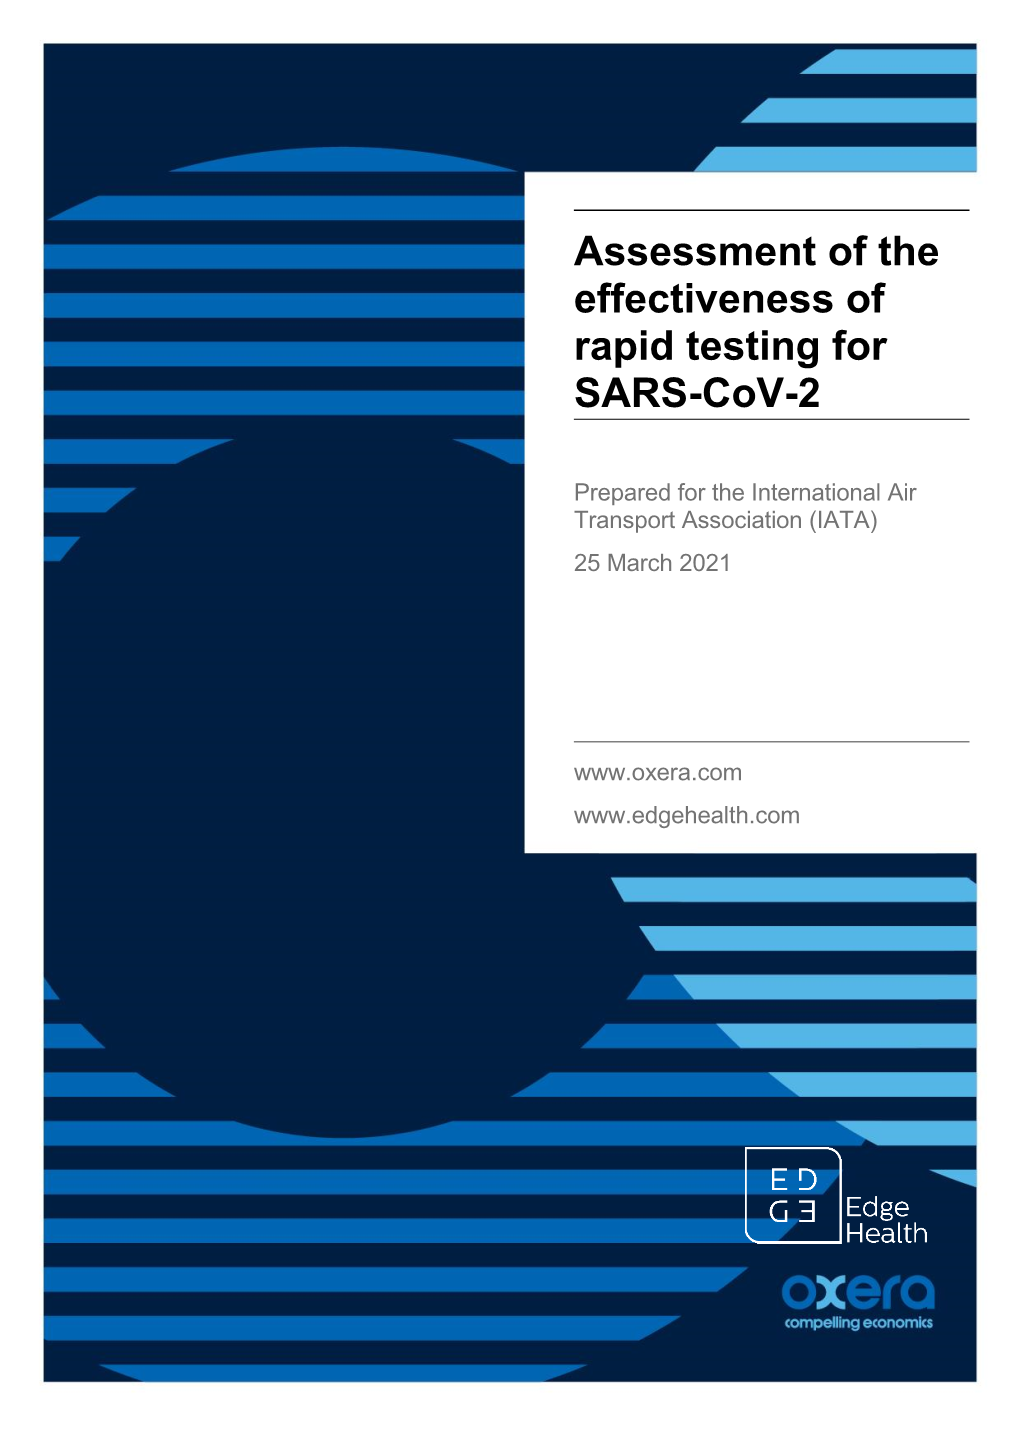 Assessment of the Effectiveness of Rapid Testing for SARS-Cov-2